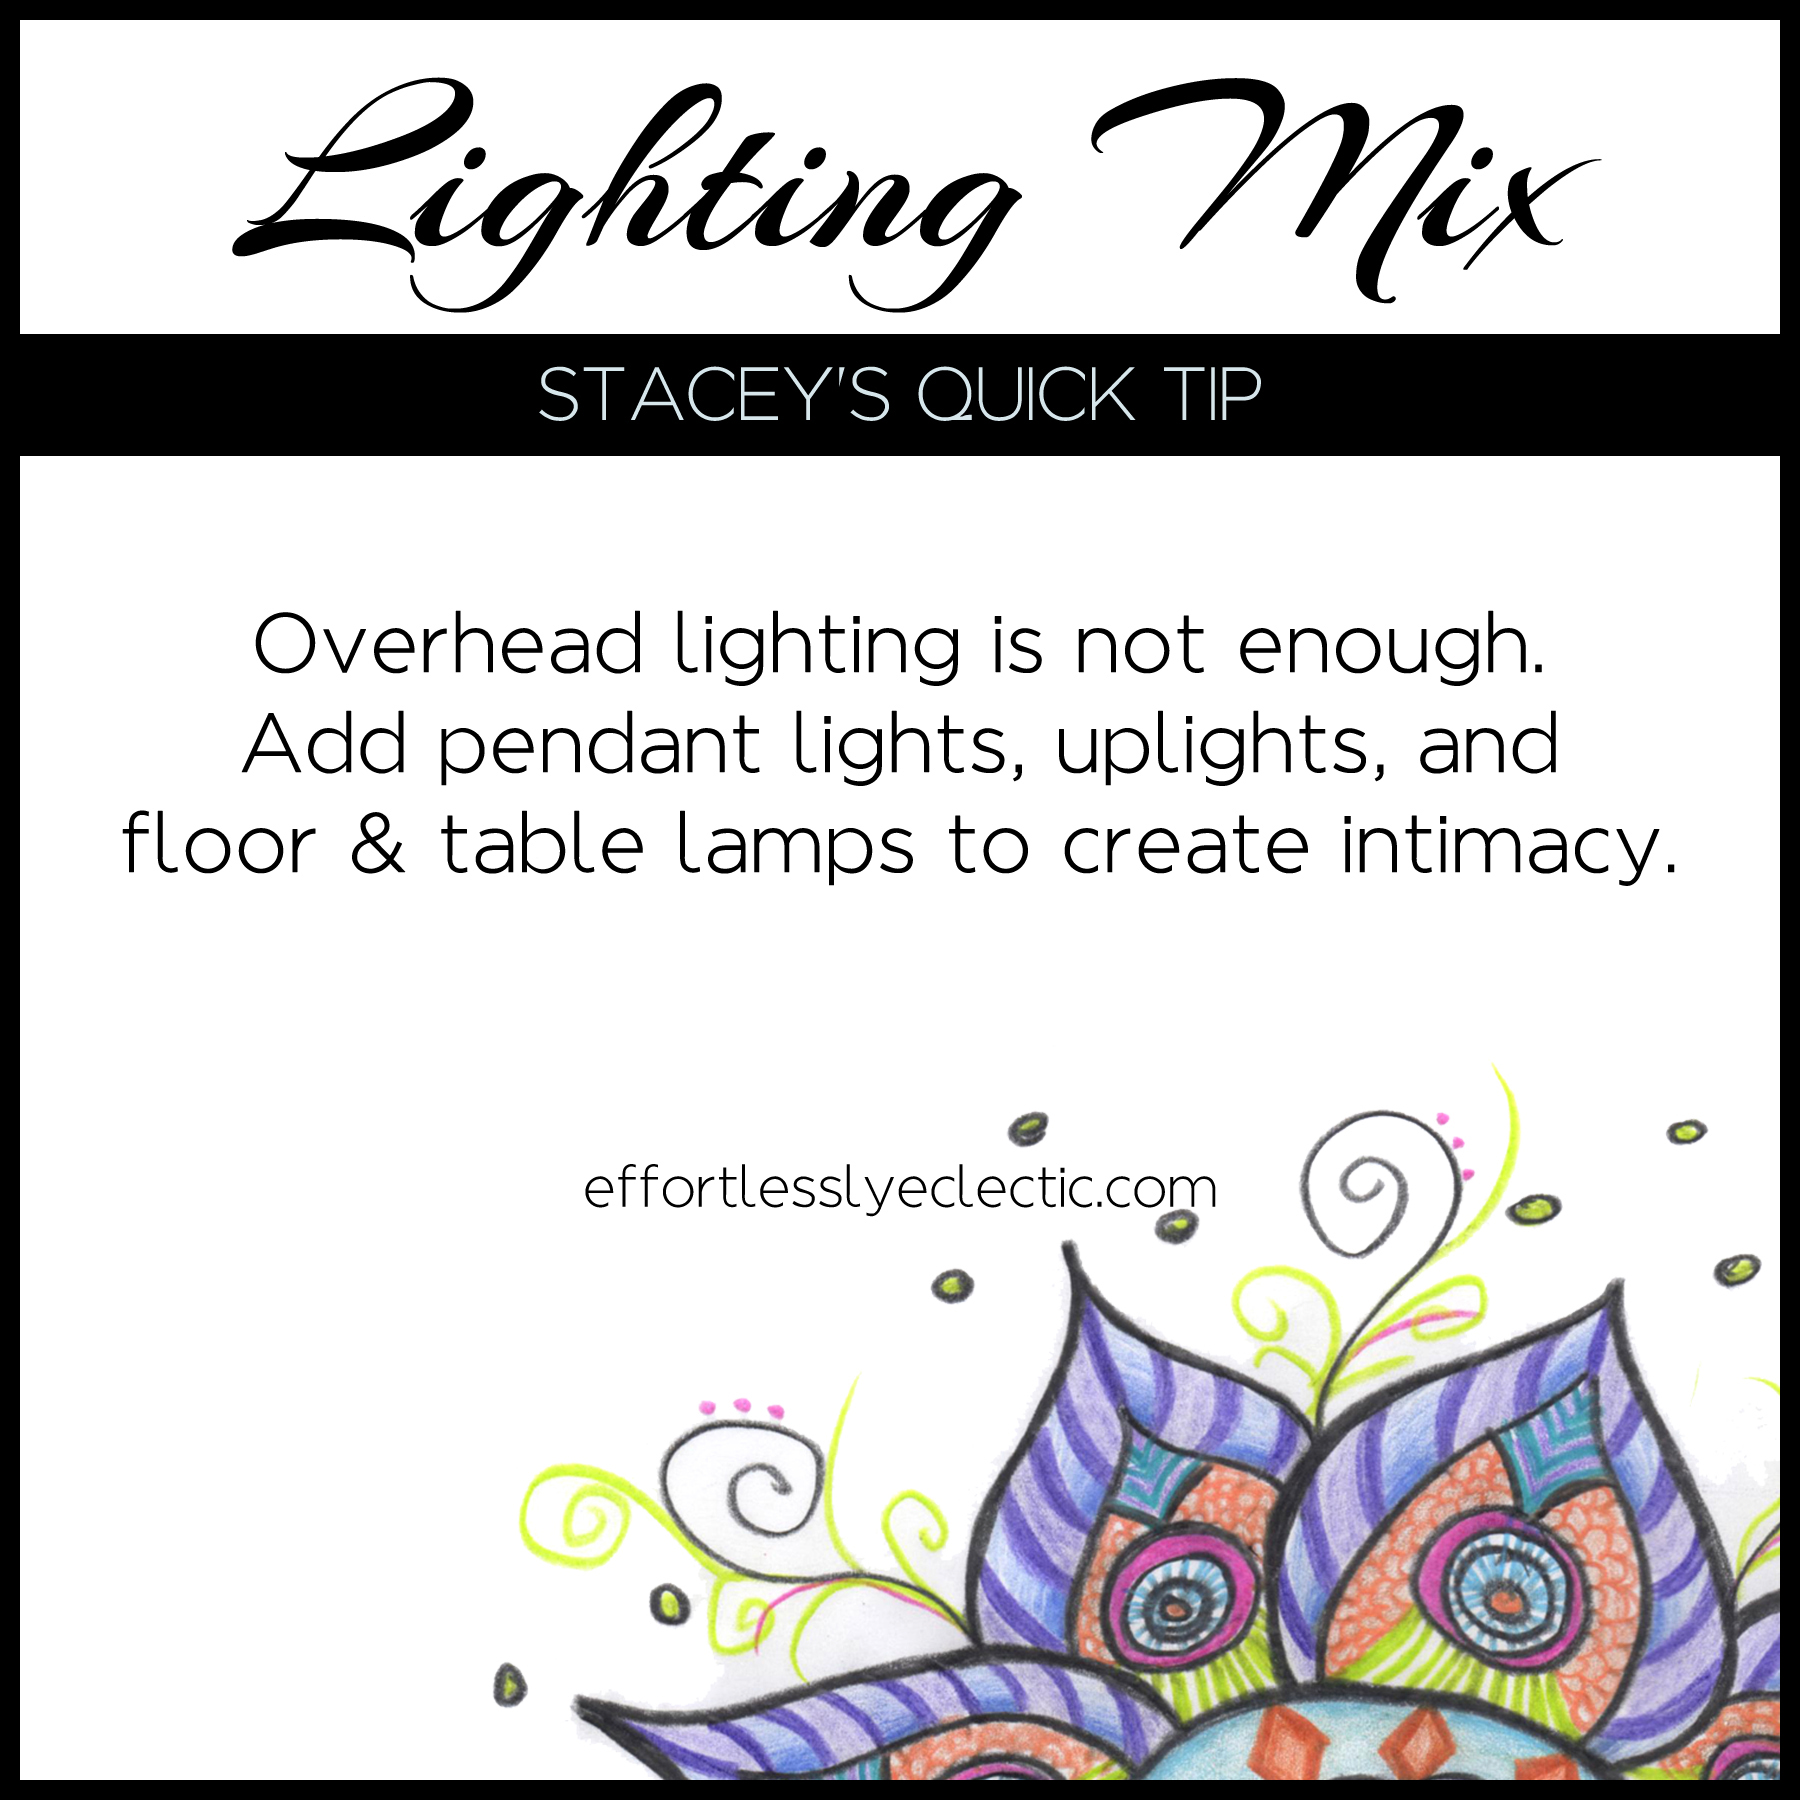 Lighting Mix - A decorating tip about how to add lighting in your home